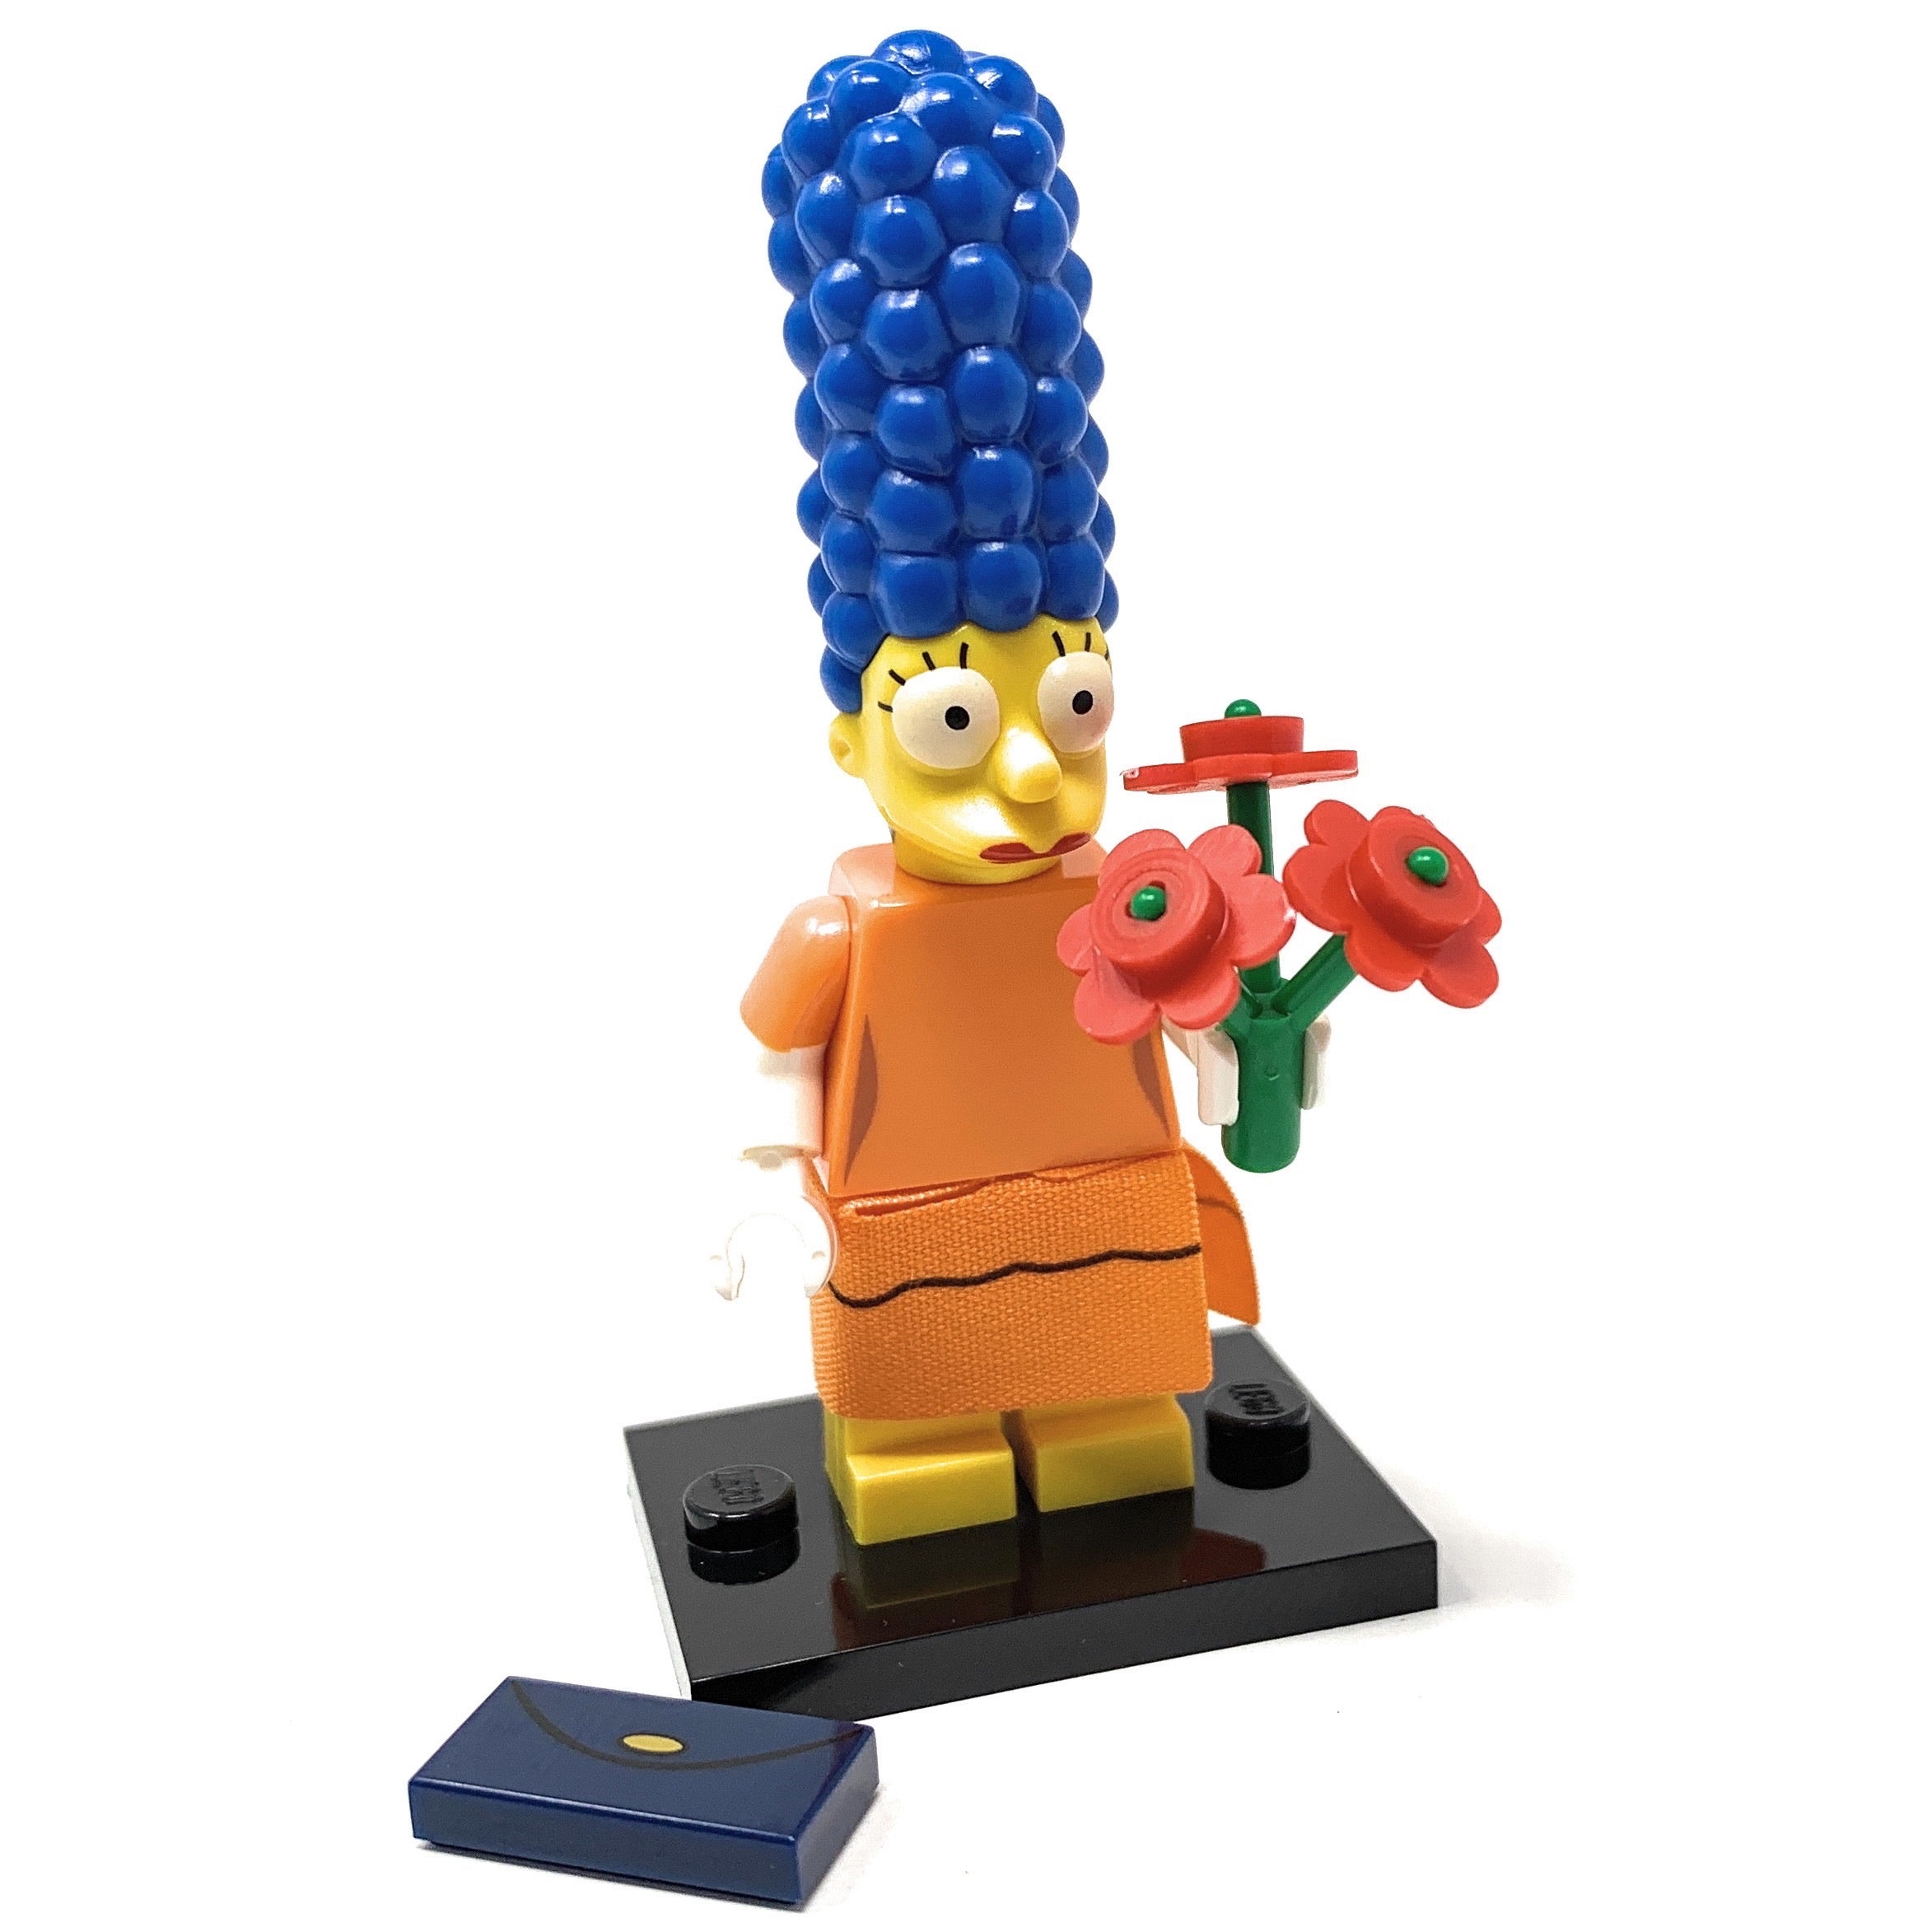 Marge Simpson (Date Night) - LEGO Simpsons Collectible Minifigure (Series 2) (2015)